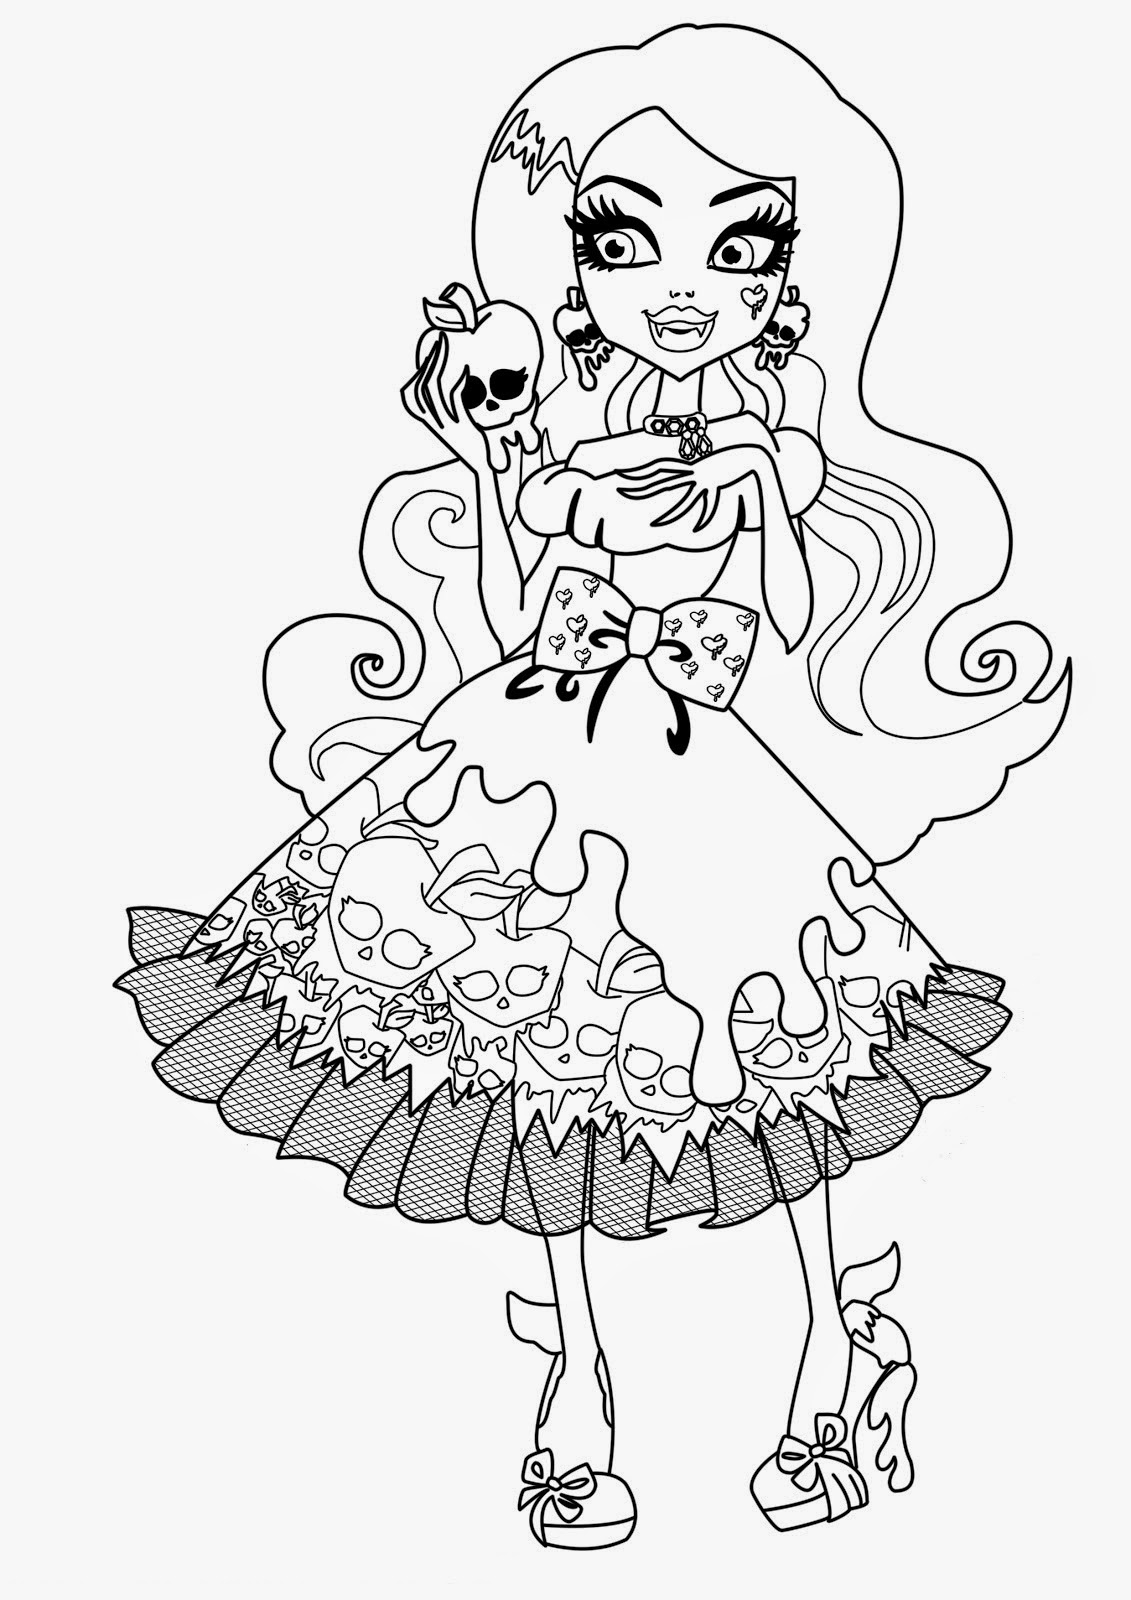 Monster High Coloring Pages Free Printable Inspiration Coloring Coloring Page Free Printable Monsterigh Pages